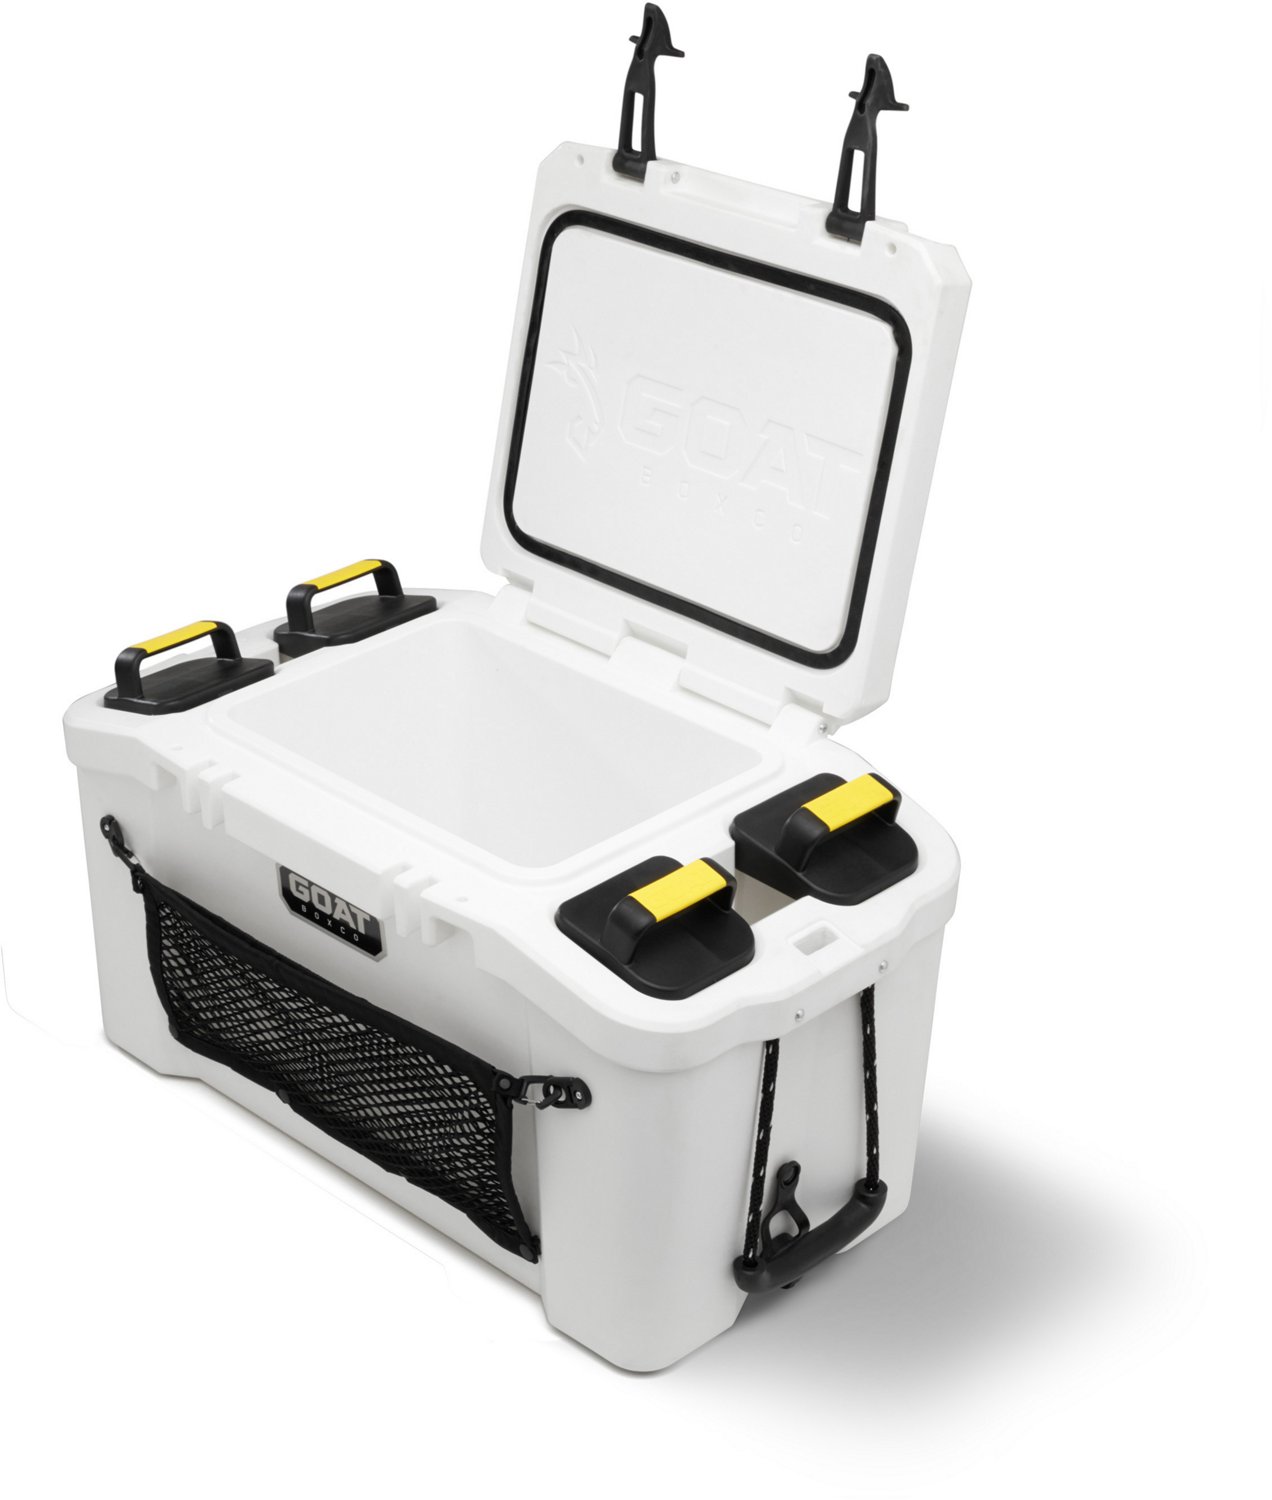 Goat Boxco Hub 70 Cooler System Gravel Grey, 70 qt - Ice Chests/Wtr Coolrs at Academy Sports